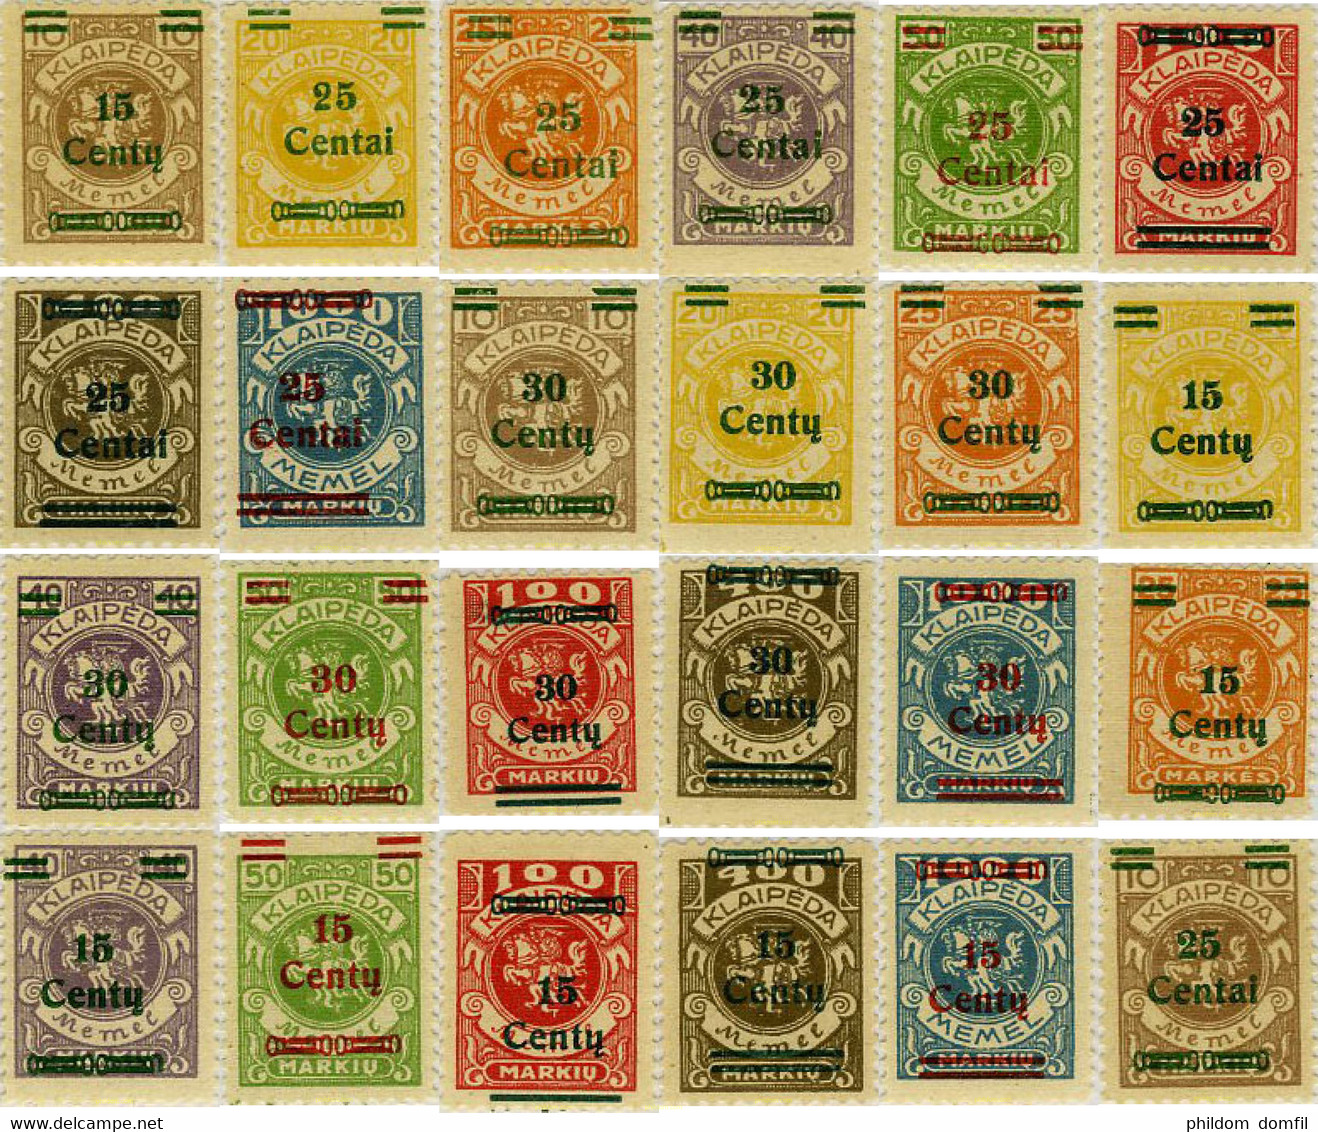 590597 HINGED MEMEL 1923 ESCUDOS - Used Stamps